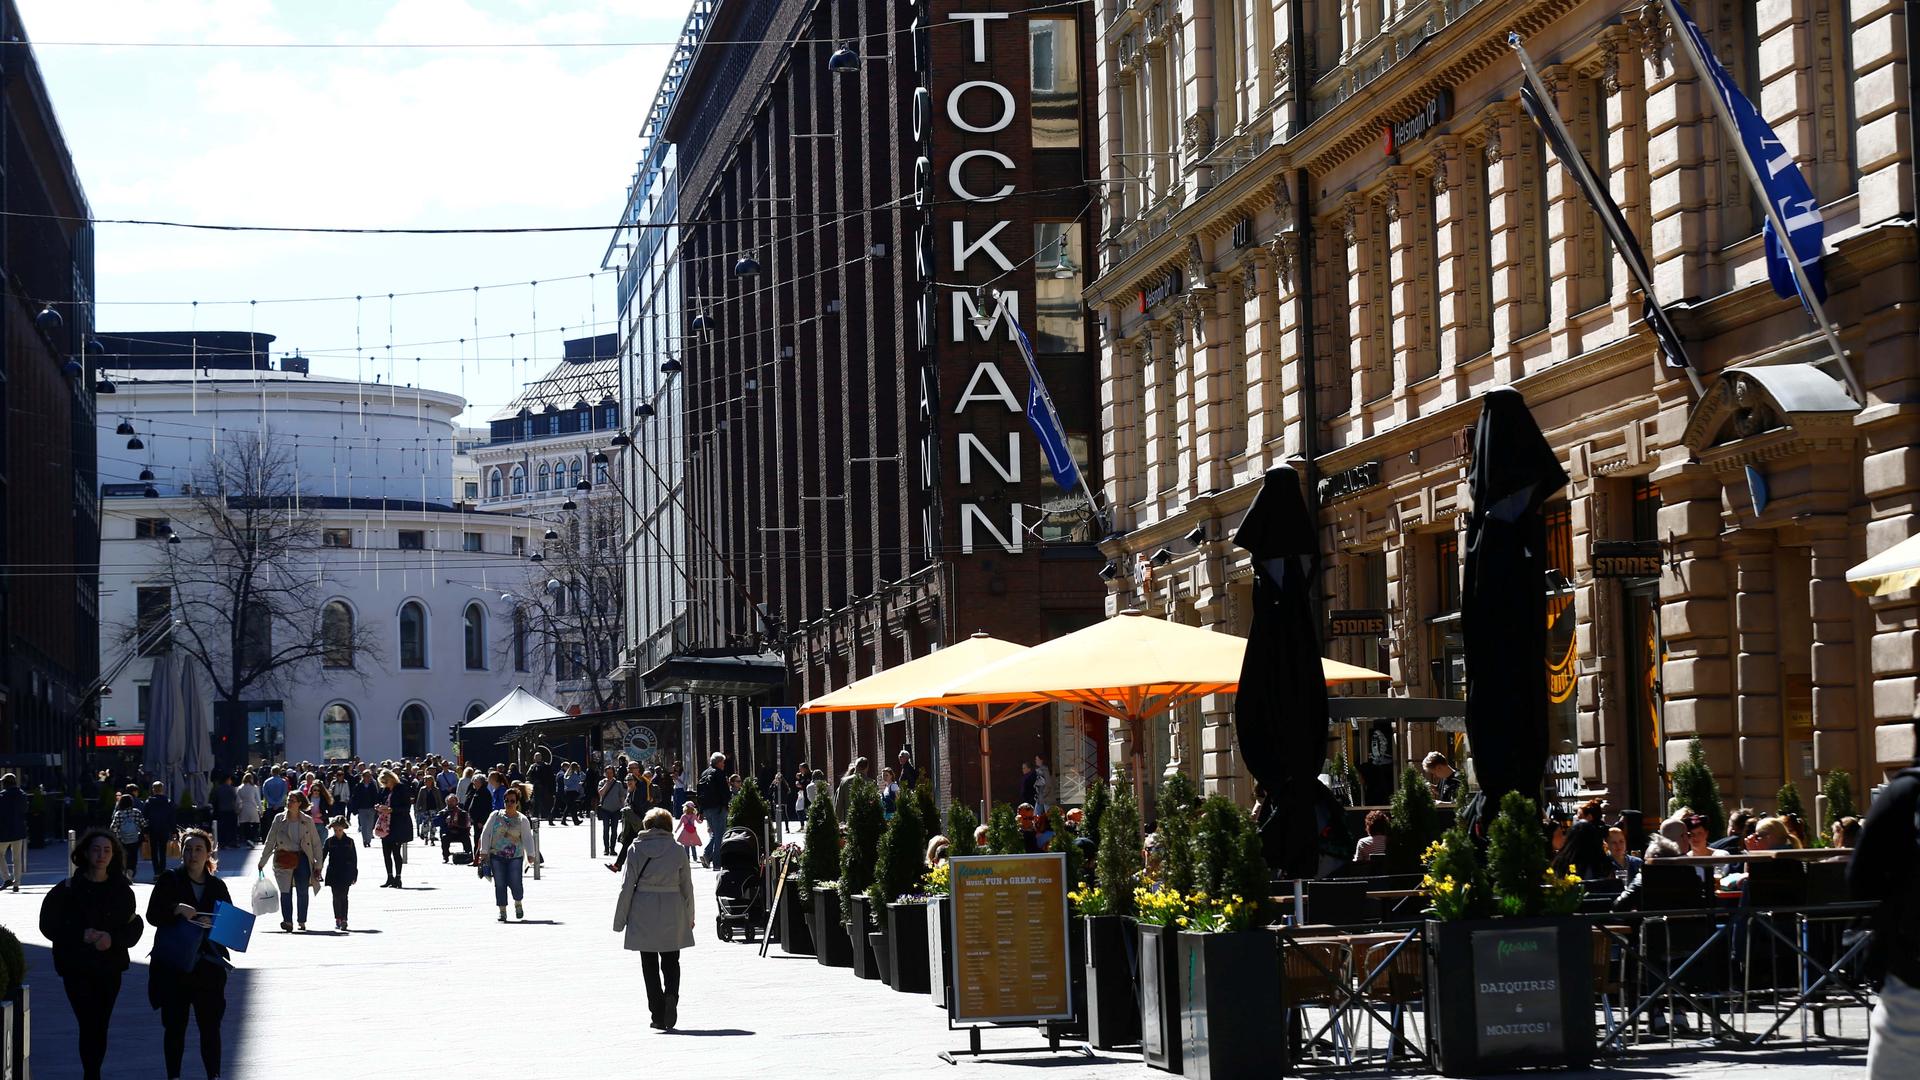 People walk past Stockmann shopping center in Helsinki, Finland, on May 6, 2017.